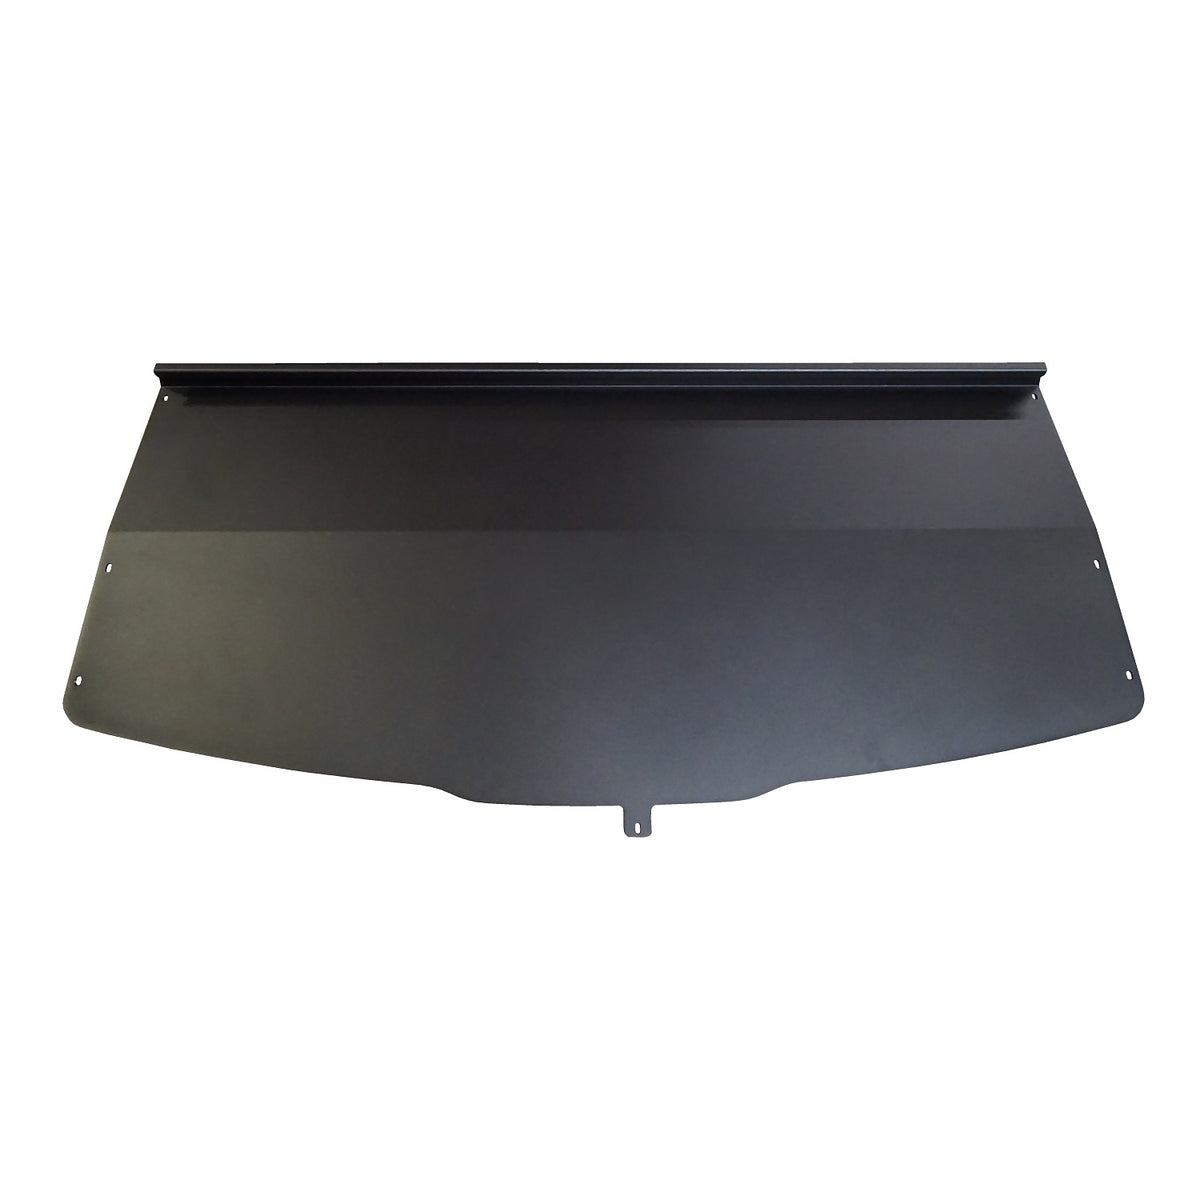 2014 - 2020 Ford Transit Headliner Shelf - Fits Mid and High Roof Vans